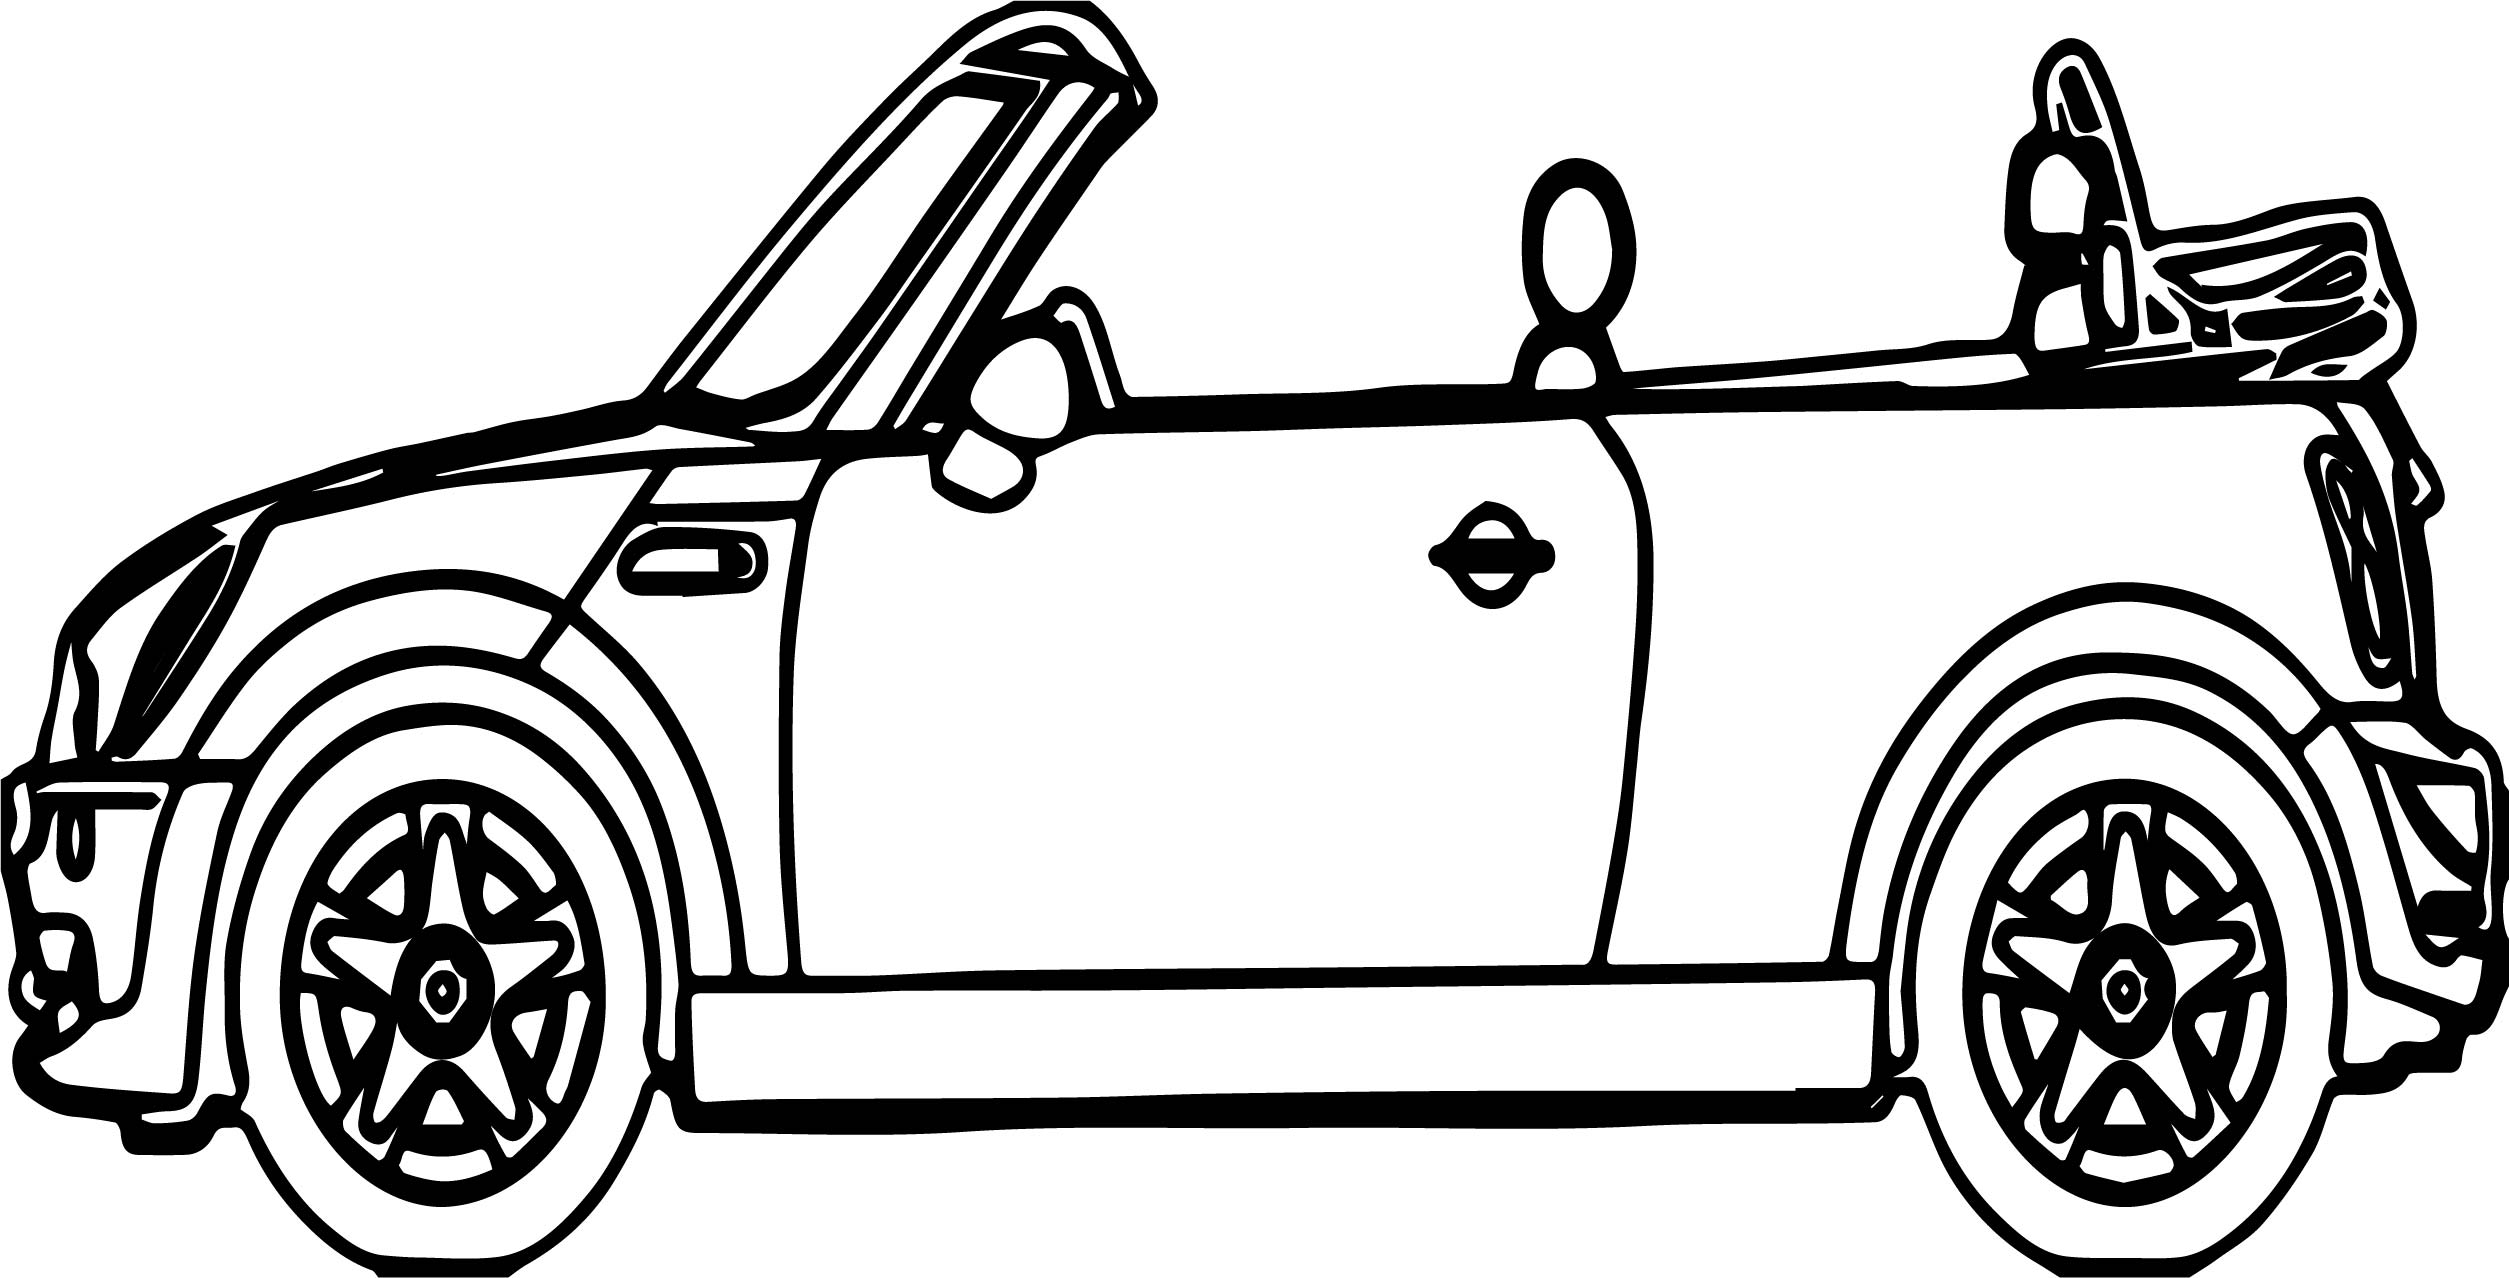 car-outline-free-download-on-clipartmag